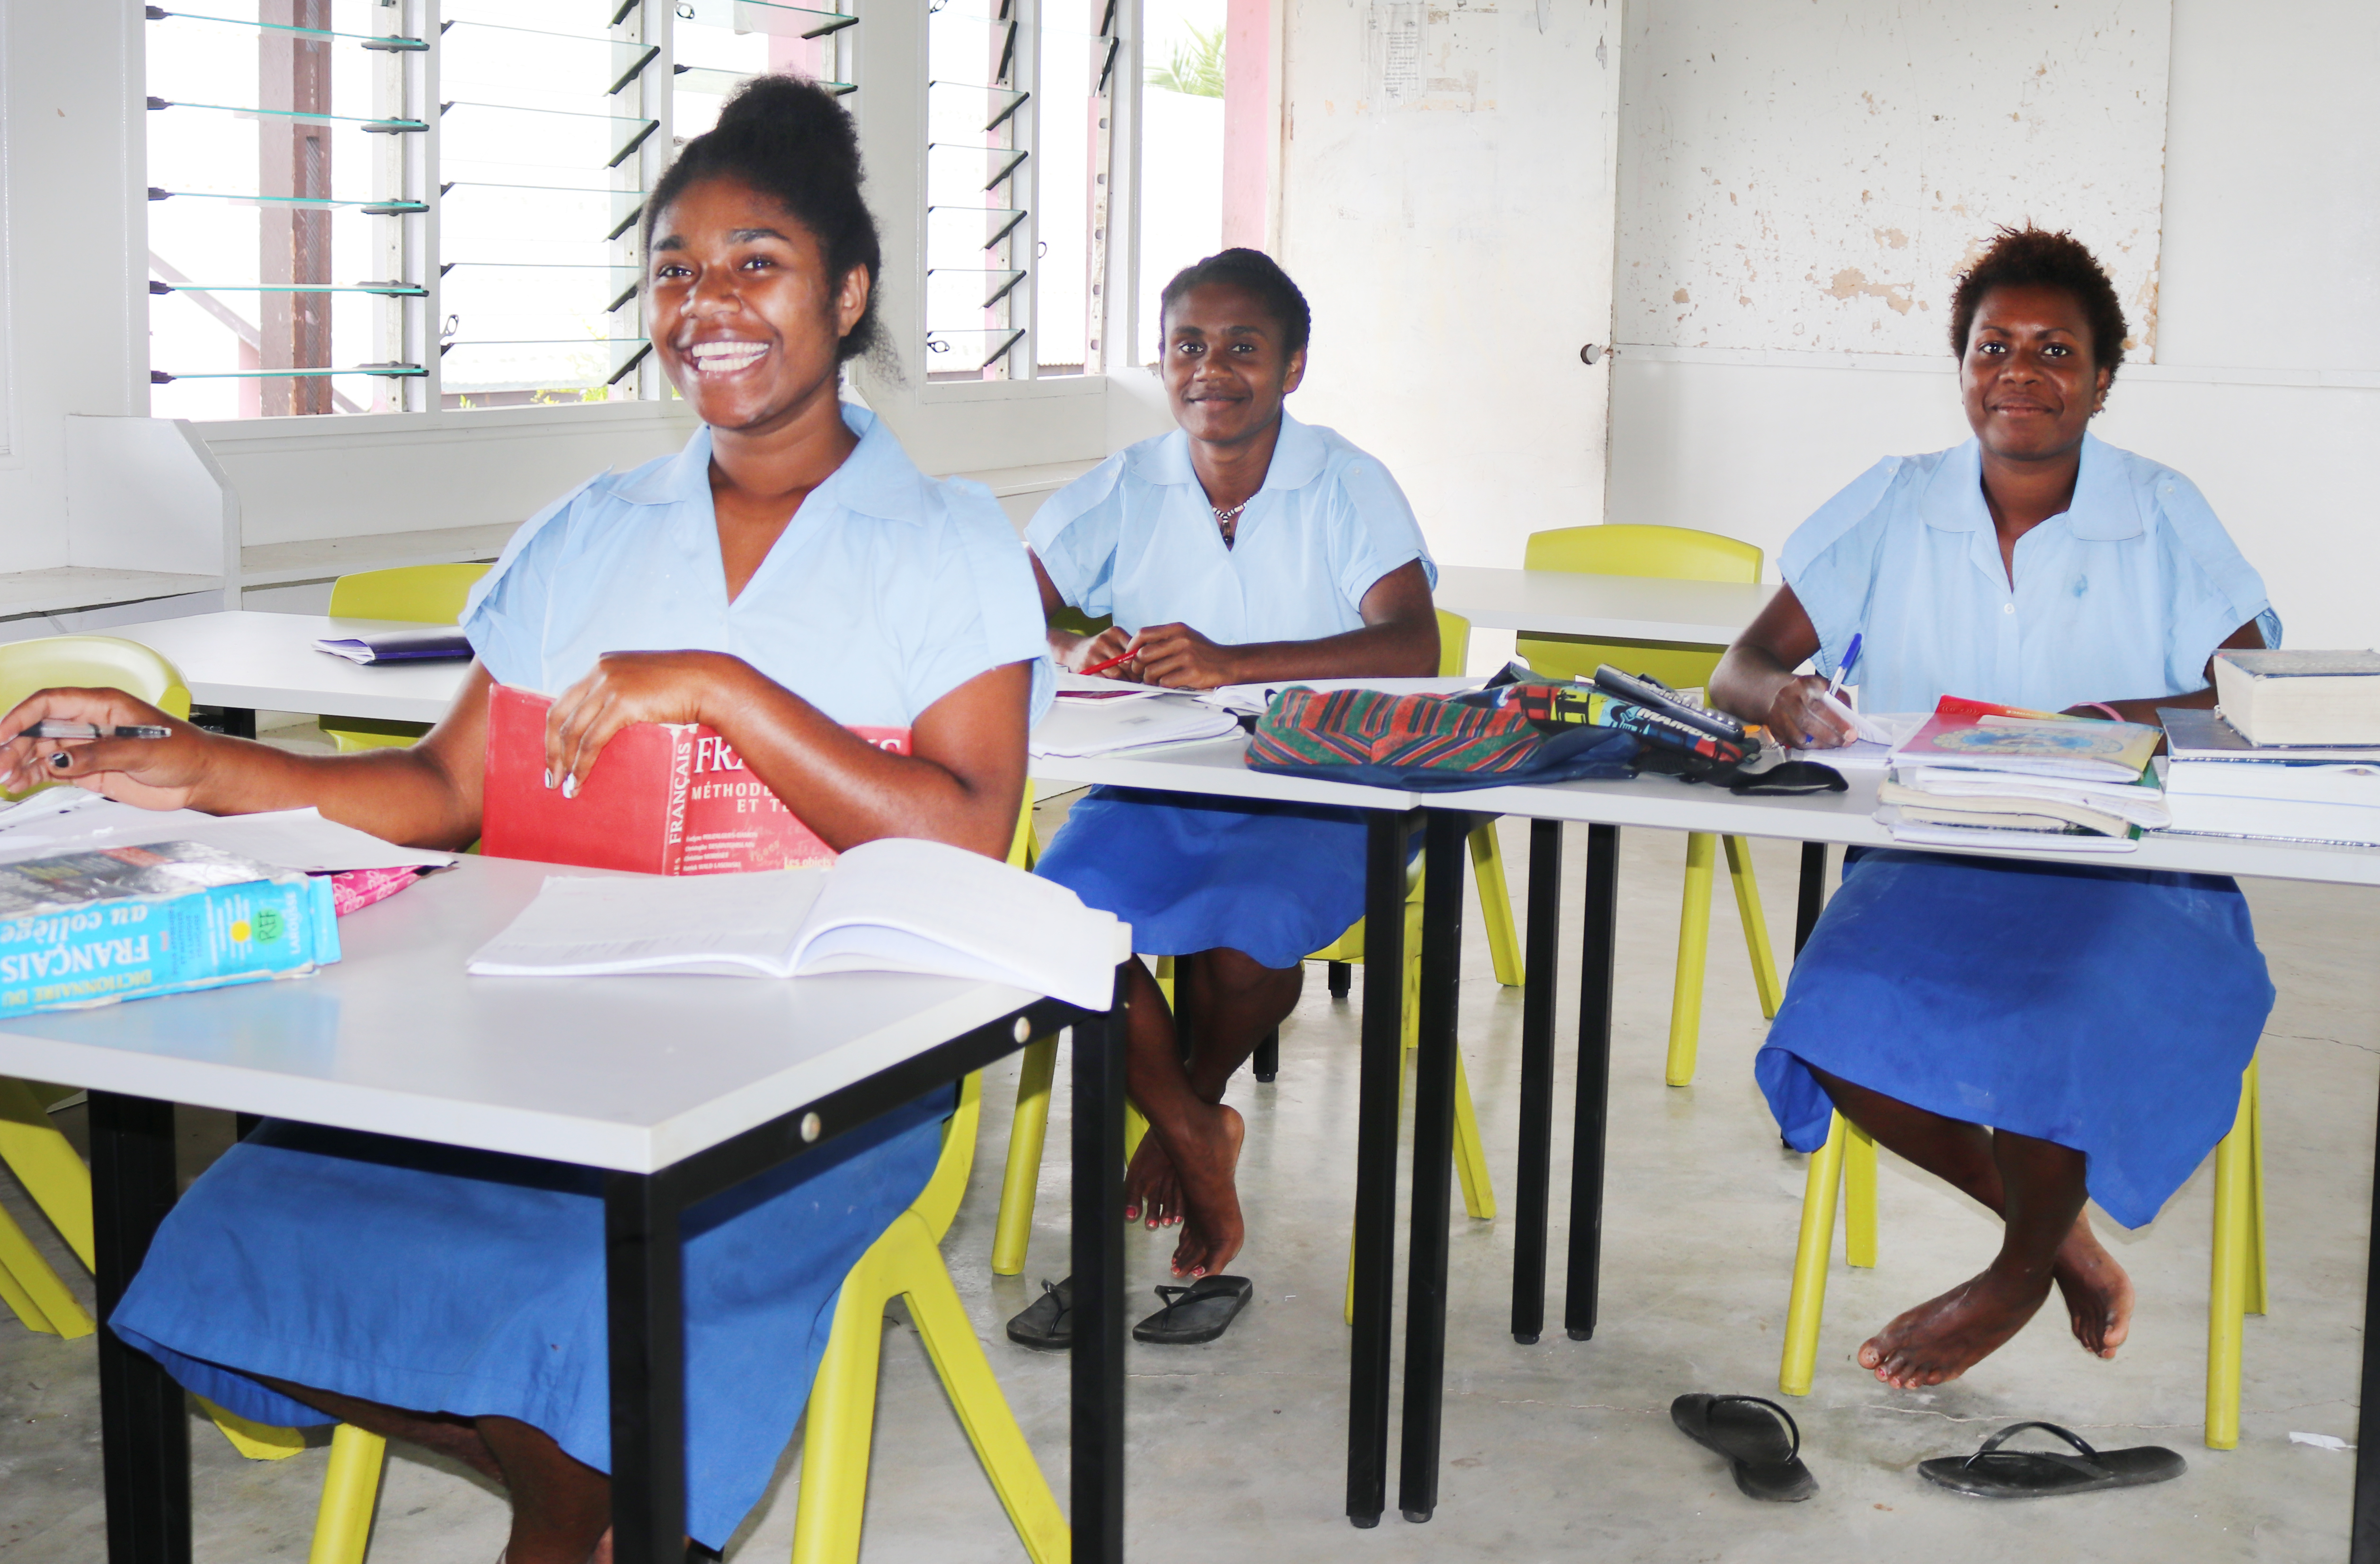 Tafea College students studying for exams. Tafea College is one of 13 schools in Vanuatu that administers the SPFSC exams.